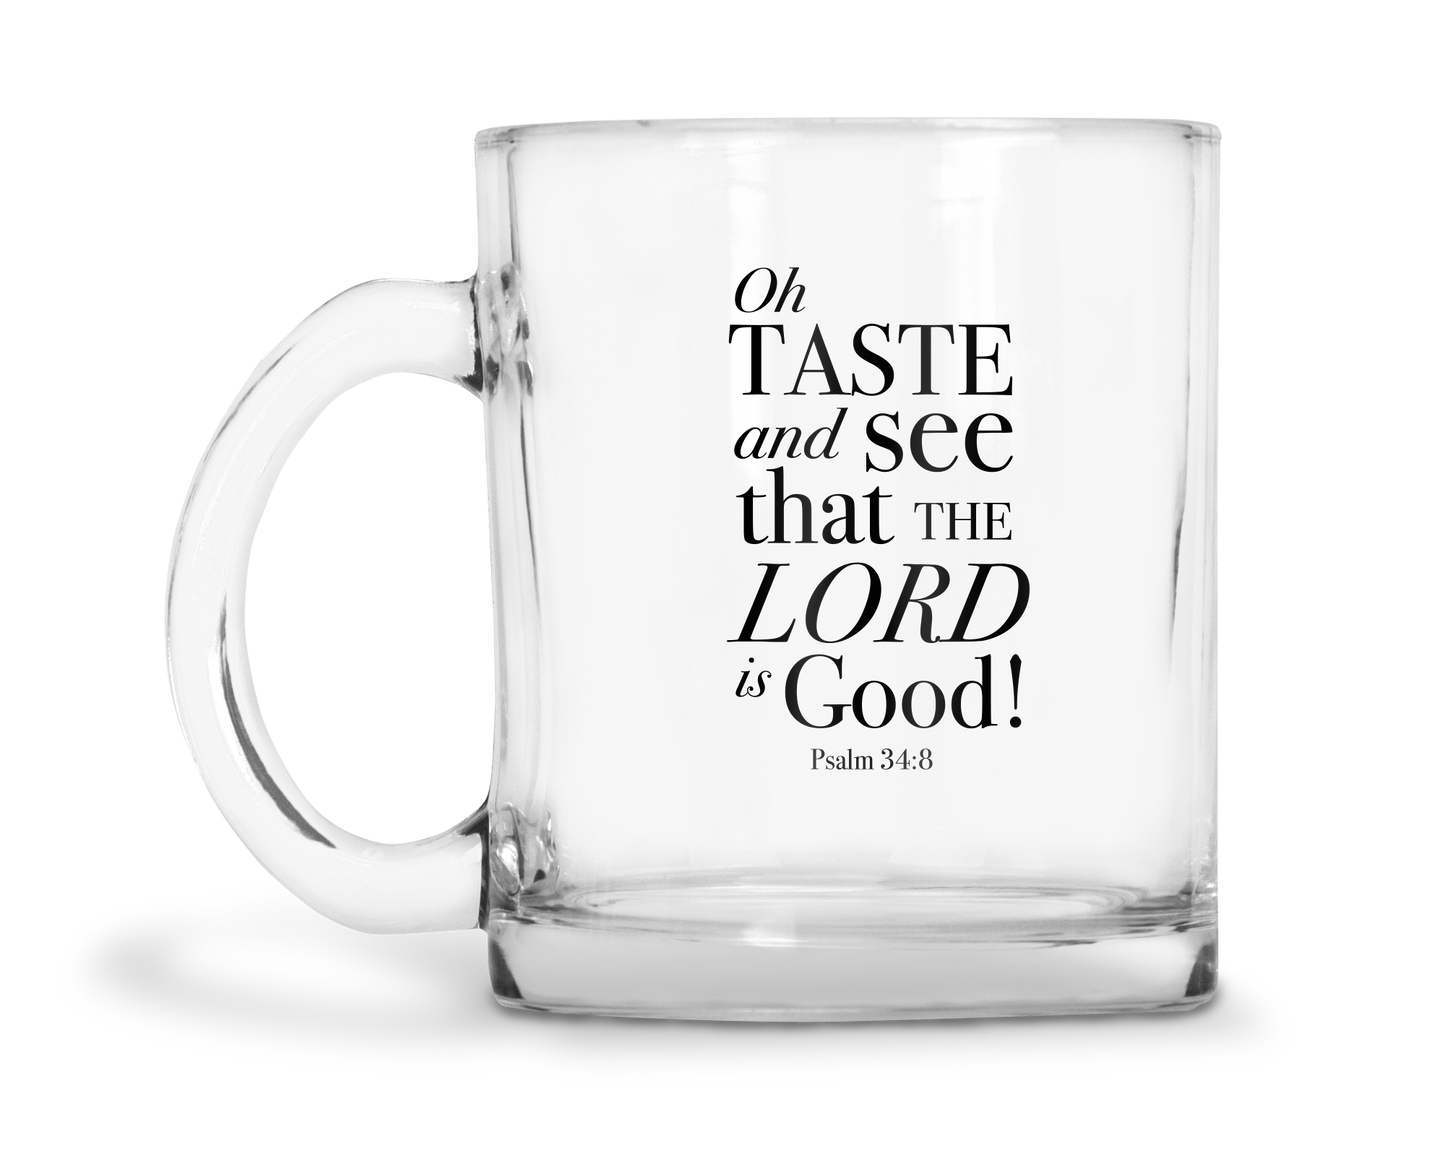 Oh Taste And See That The Lord Is Good - Psalm 34:8 KJV - 10oz Glass Mug